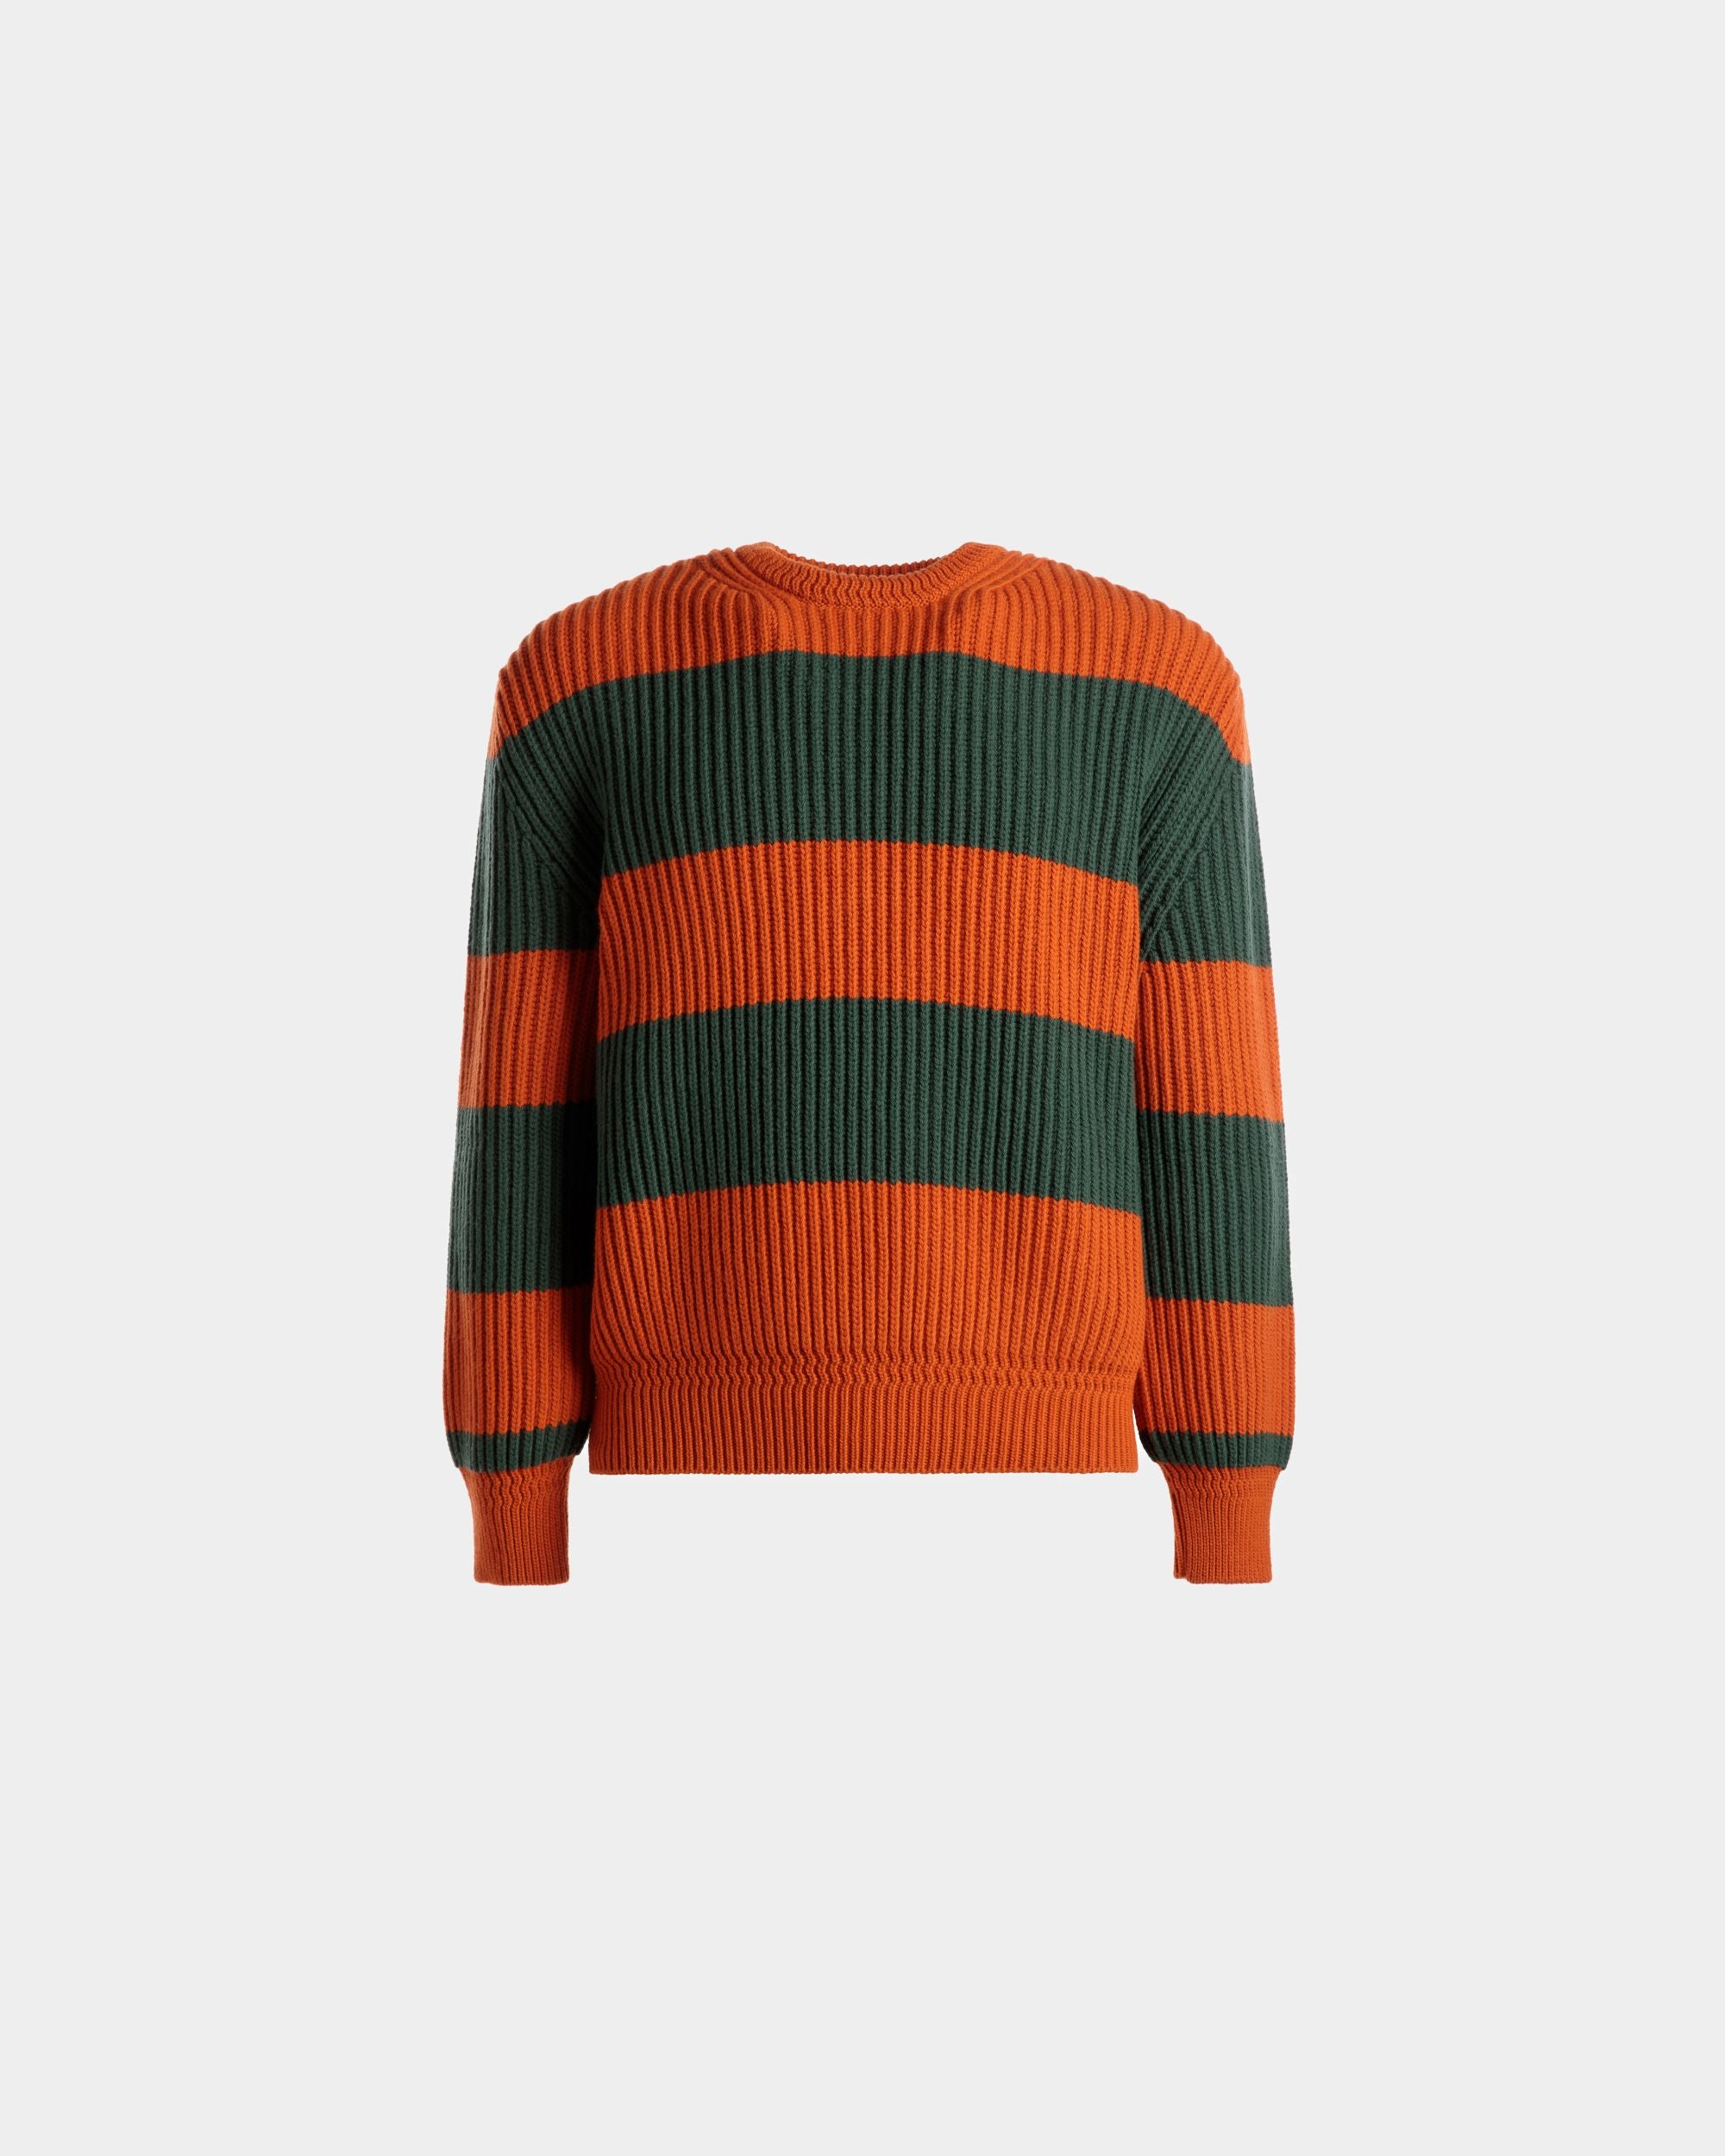 Striped Crew Neck Sweater | Men's Sweater | Orange And Kelly Green Wool | Bally | Still Life Front